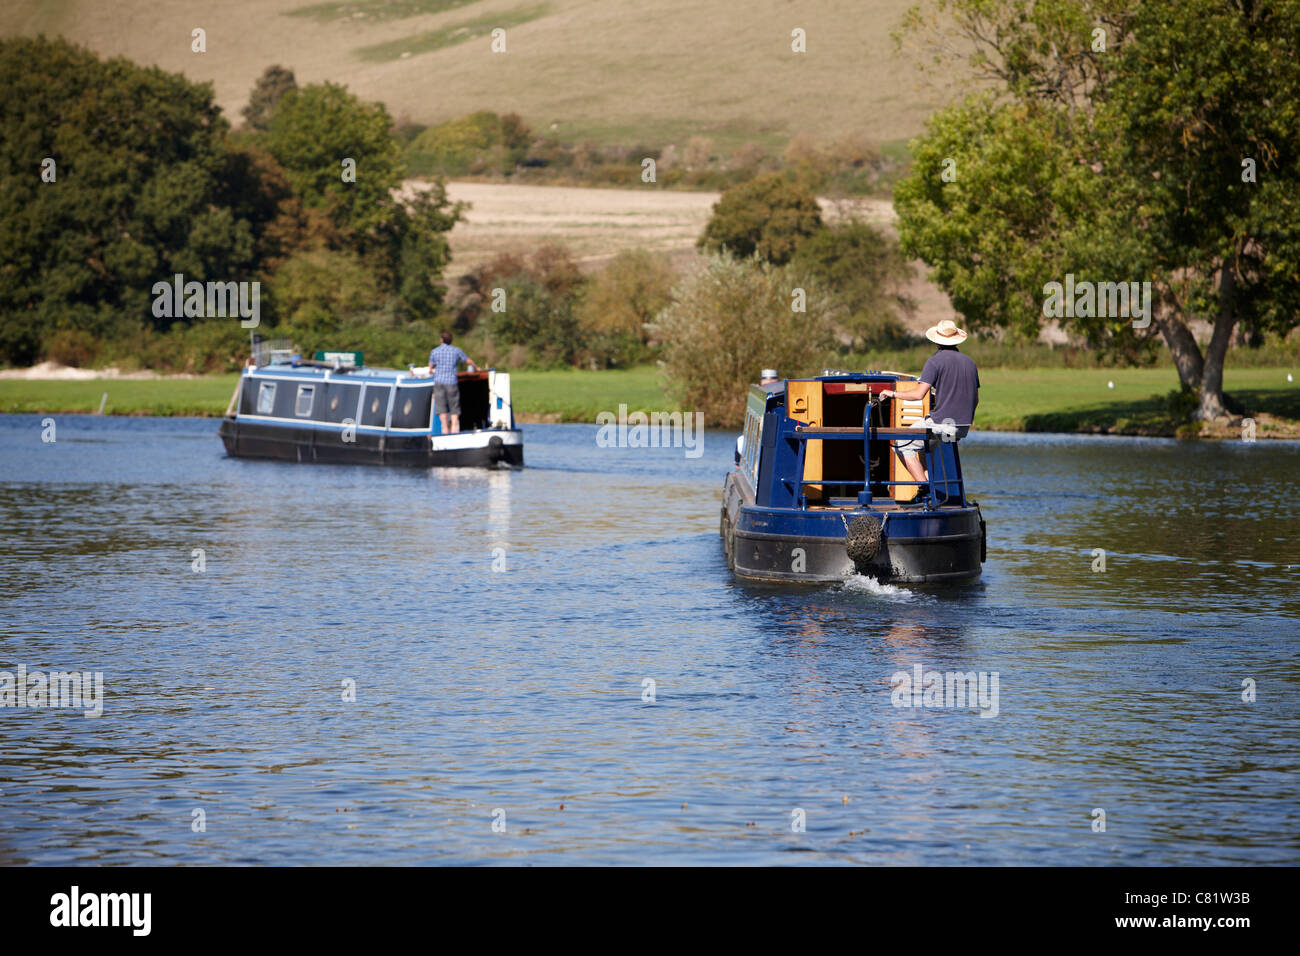 Two barges on the River Thames near to Maple Durham Lock, Berkshire. Stock Photo